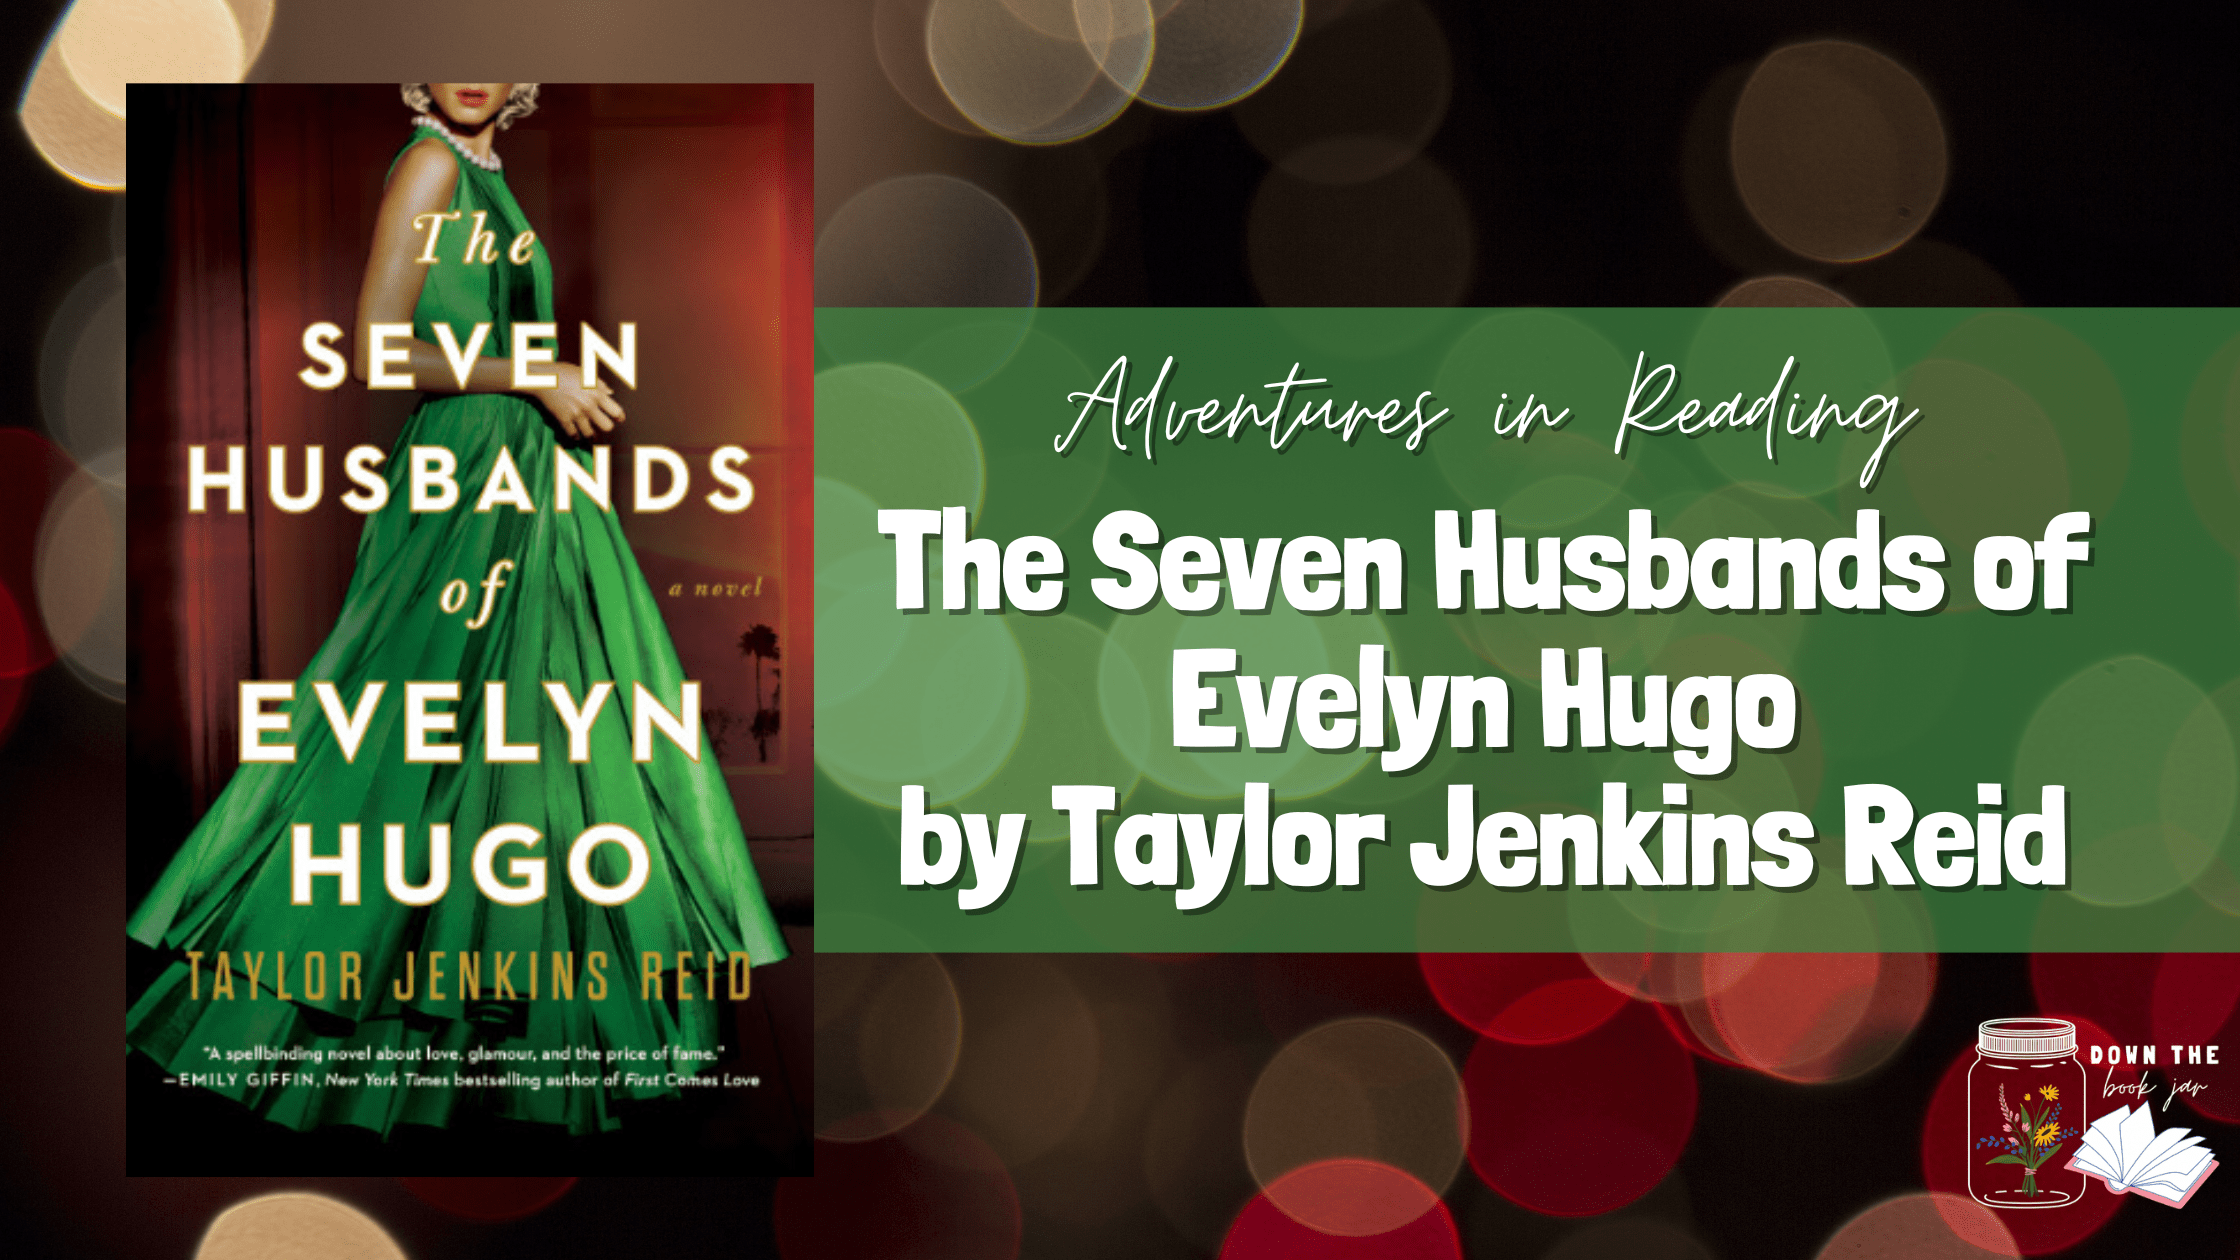 The Seven Husbands of Evelyn Hugo by Taylor Jenkins Reid - Down the Book Jar